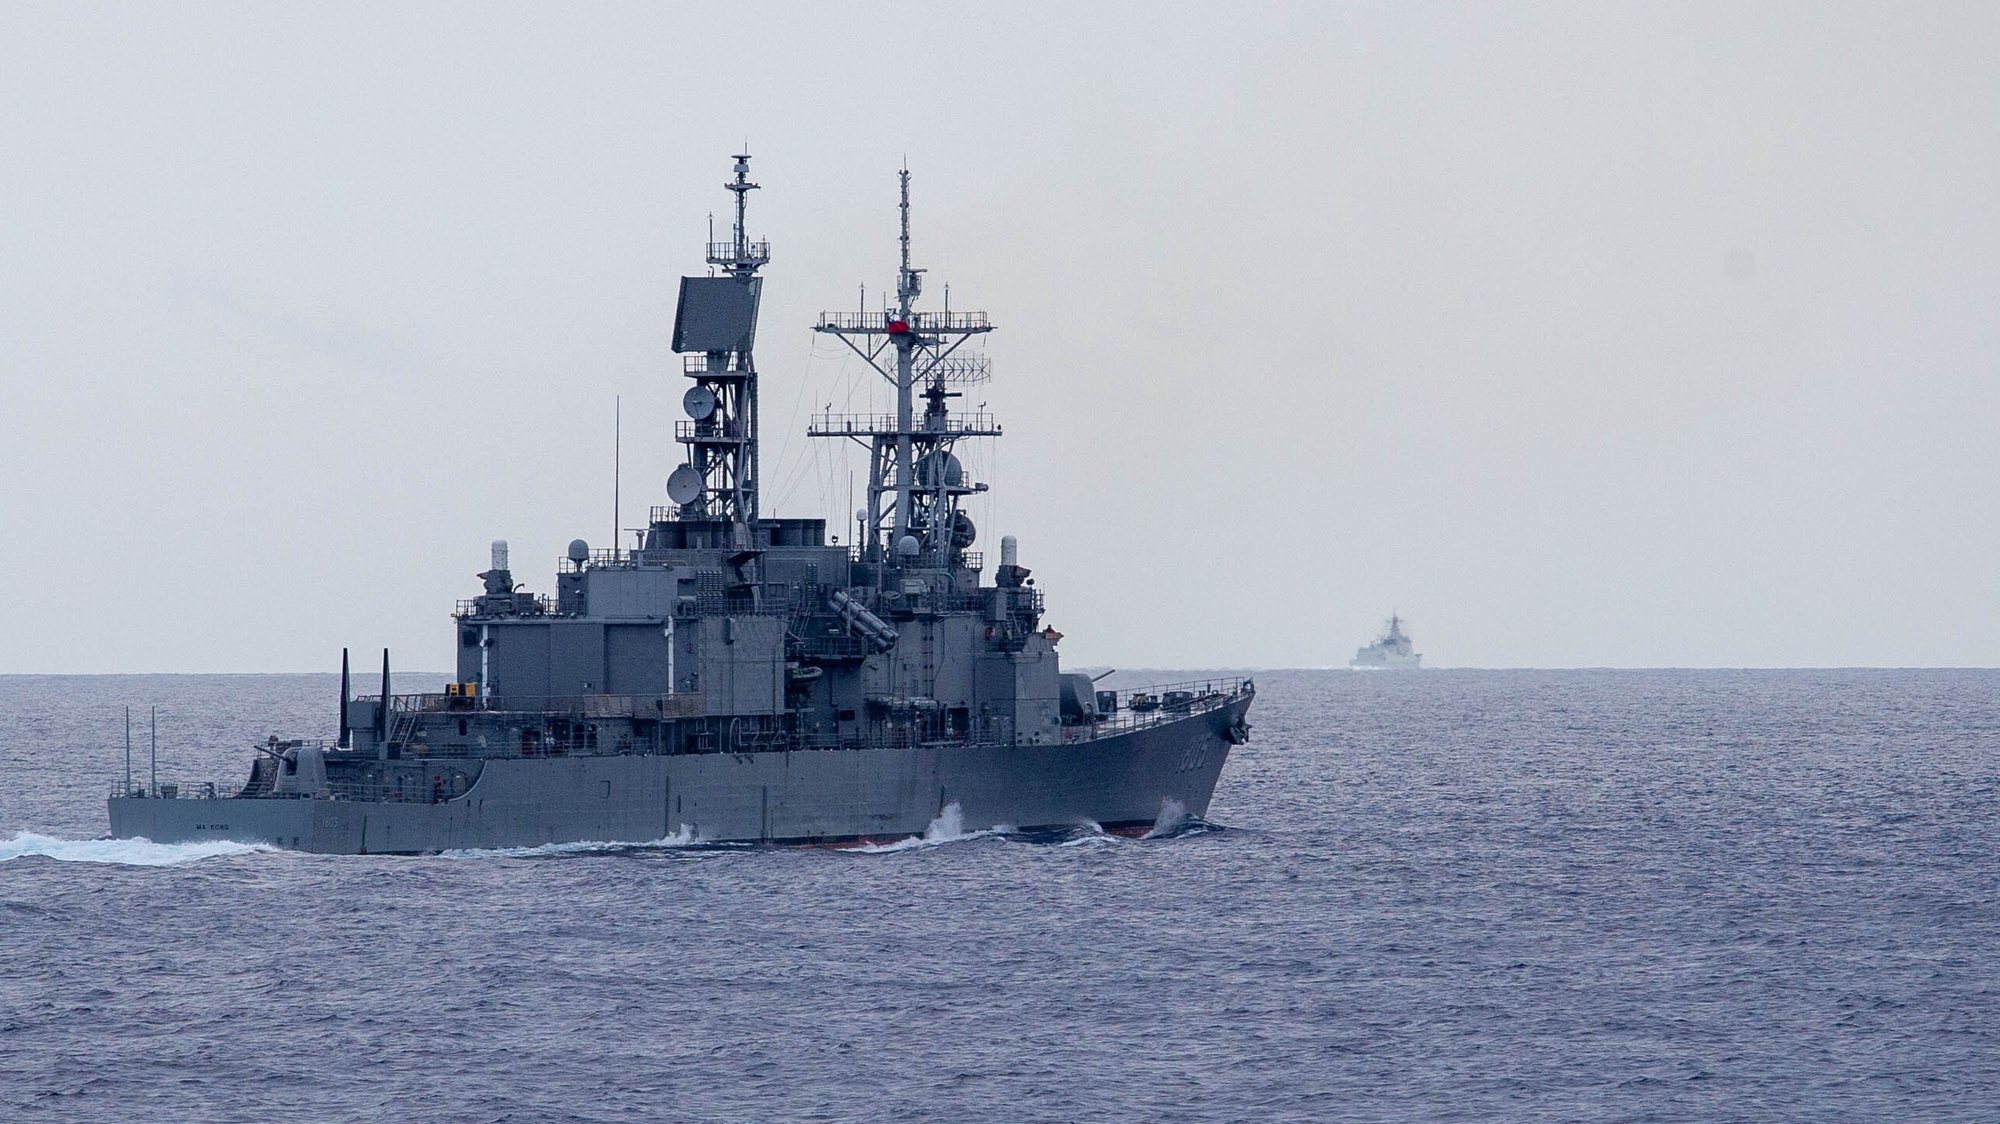 epa11365462 A handout photo taken 23/24 May 2024 and made available by the Taiwan Ministry of National Defense on 24 May 2024, shows Taiwan’s Ma Kong (DDG-1805) Kee Lung-class guided-missile destroyer (L) maneuvers as it monitor the movement of Chinese destroyer Xi&#039;an (DDG-153) (R) at an undisclosed location around the waters of Taiwan. According to Chinese state media Xinhua, &#039;the Eastern Theater Command of the Chinese People&#039;s Liberation Army (PLA) started a two-day joint military drills surrounding the island of Taiwan on 23 May&#039;. Taiwan&#039;s Defense Ministry stated on 23 May that China was engaging in &#039;irrational provocation&#039; by encircling Taiwan with its ongoing military exercises, just days after President William Lai&#039;s inauguration.  EPA/TAIWAN DEFENSE MINISTRY / HANDOUT MANDATORY CREDIT  HANDOUT EDITORIAL USE ONLY/NO SALES HANDOUT EDITORIAL USE ONLY/NO SALES